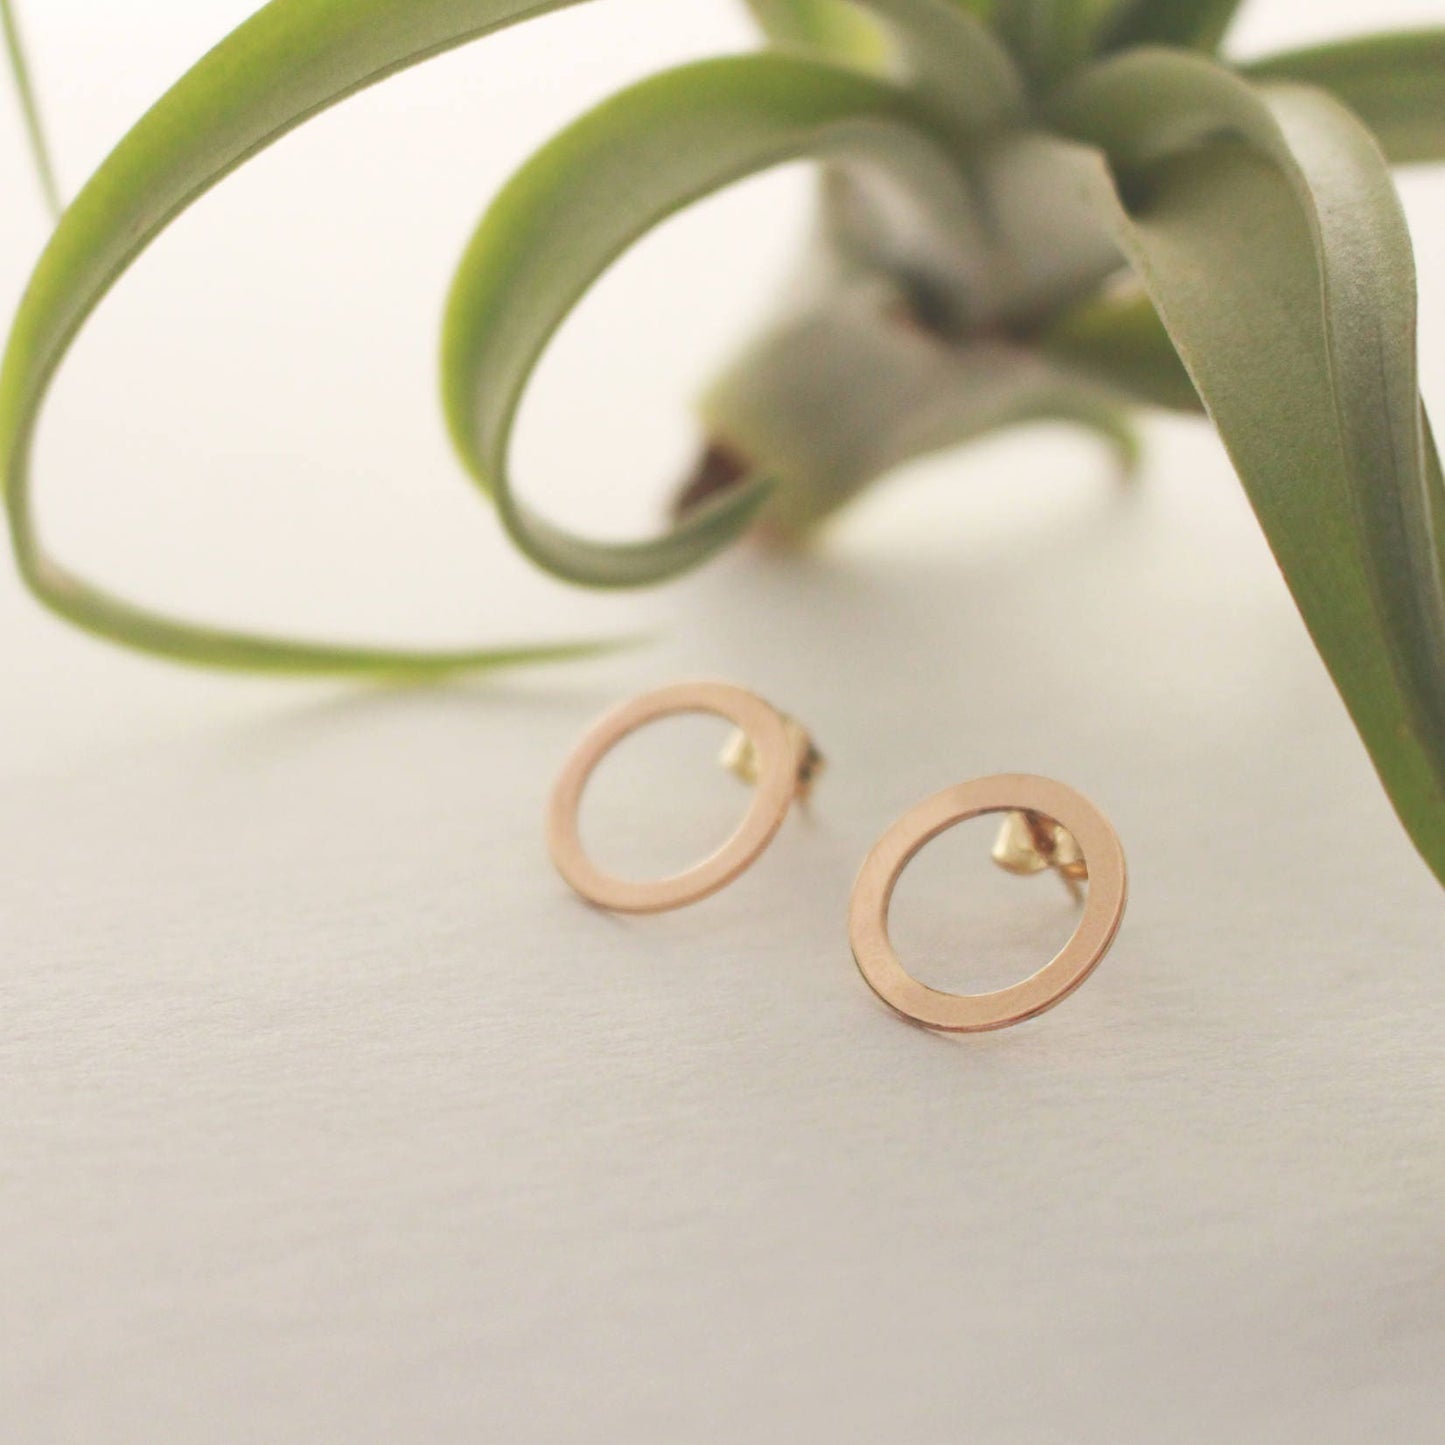 Gold Circle Stud Earrings -13mm(Large), 14K Gold Filled